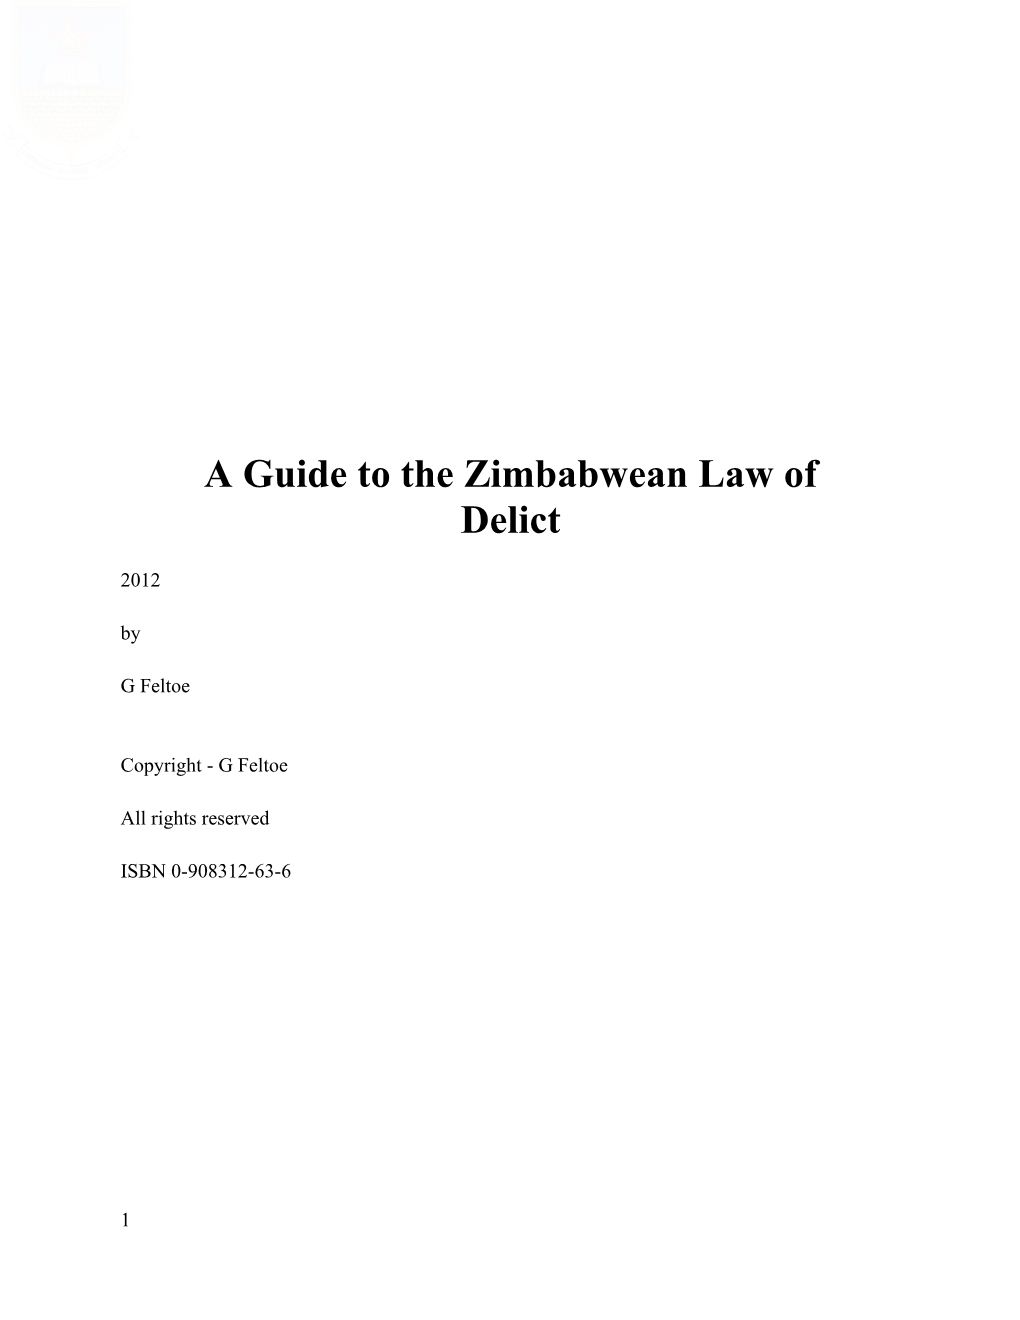 A Guide to the Zimbabwean Law of Delict